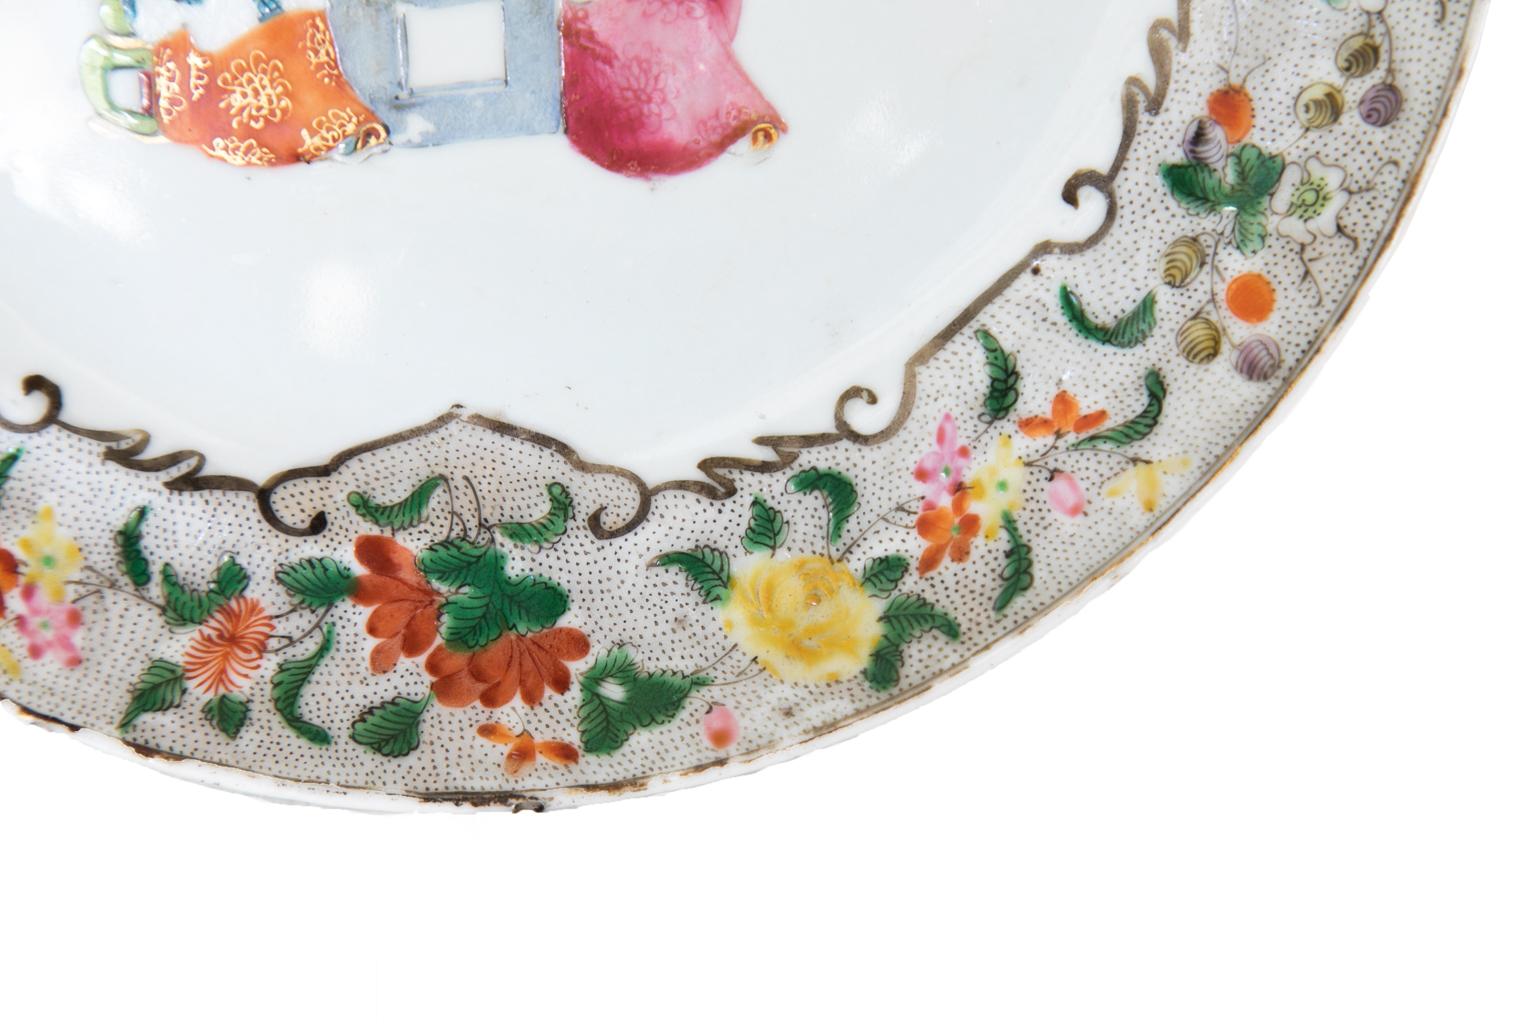 Chinese rose mandarin plate, depicting mandarins, with attendants, playing a board game. It has a floral patterned border with a stippled background.